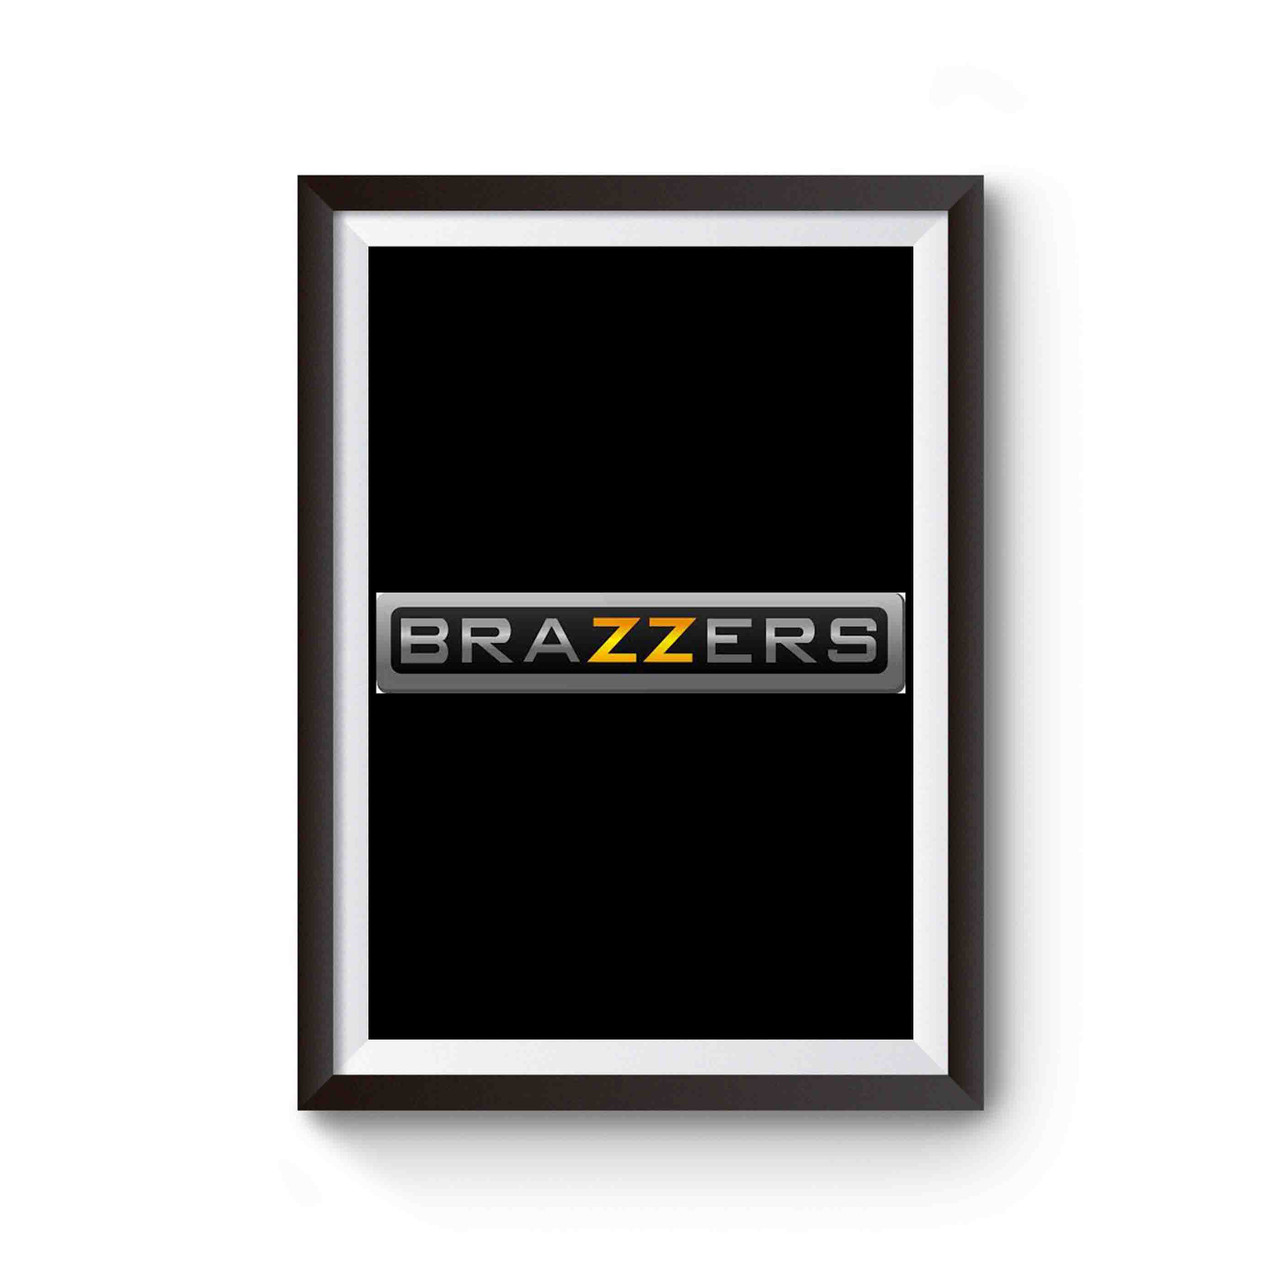 Funny Humor Posters - Brazzers Funny Cool Porn Industry Poster